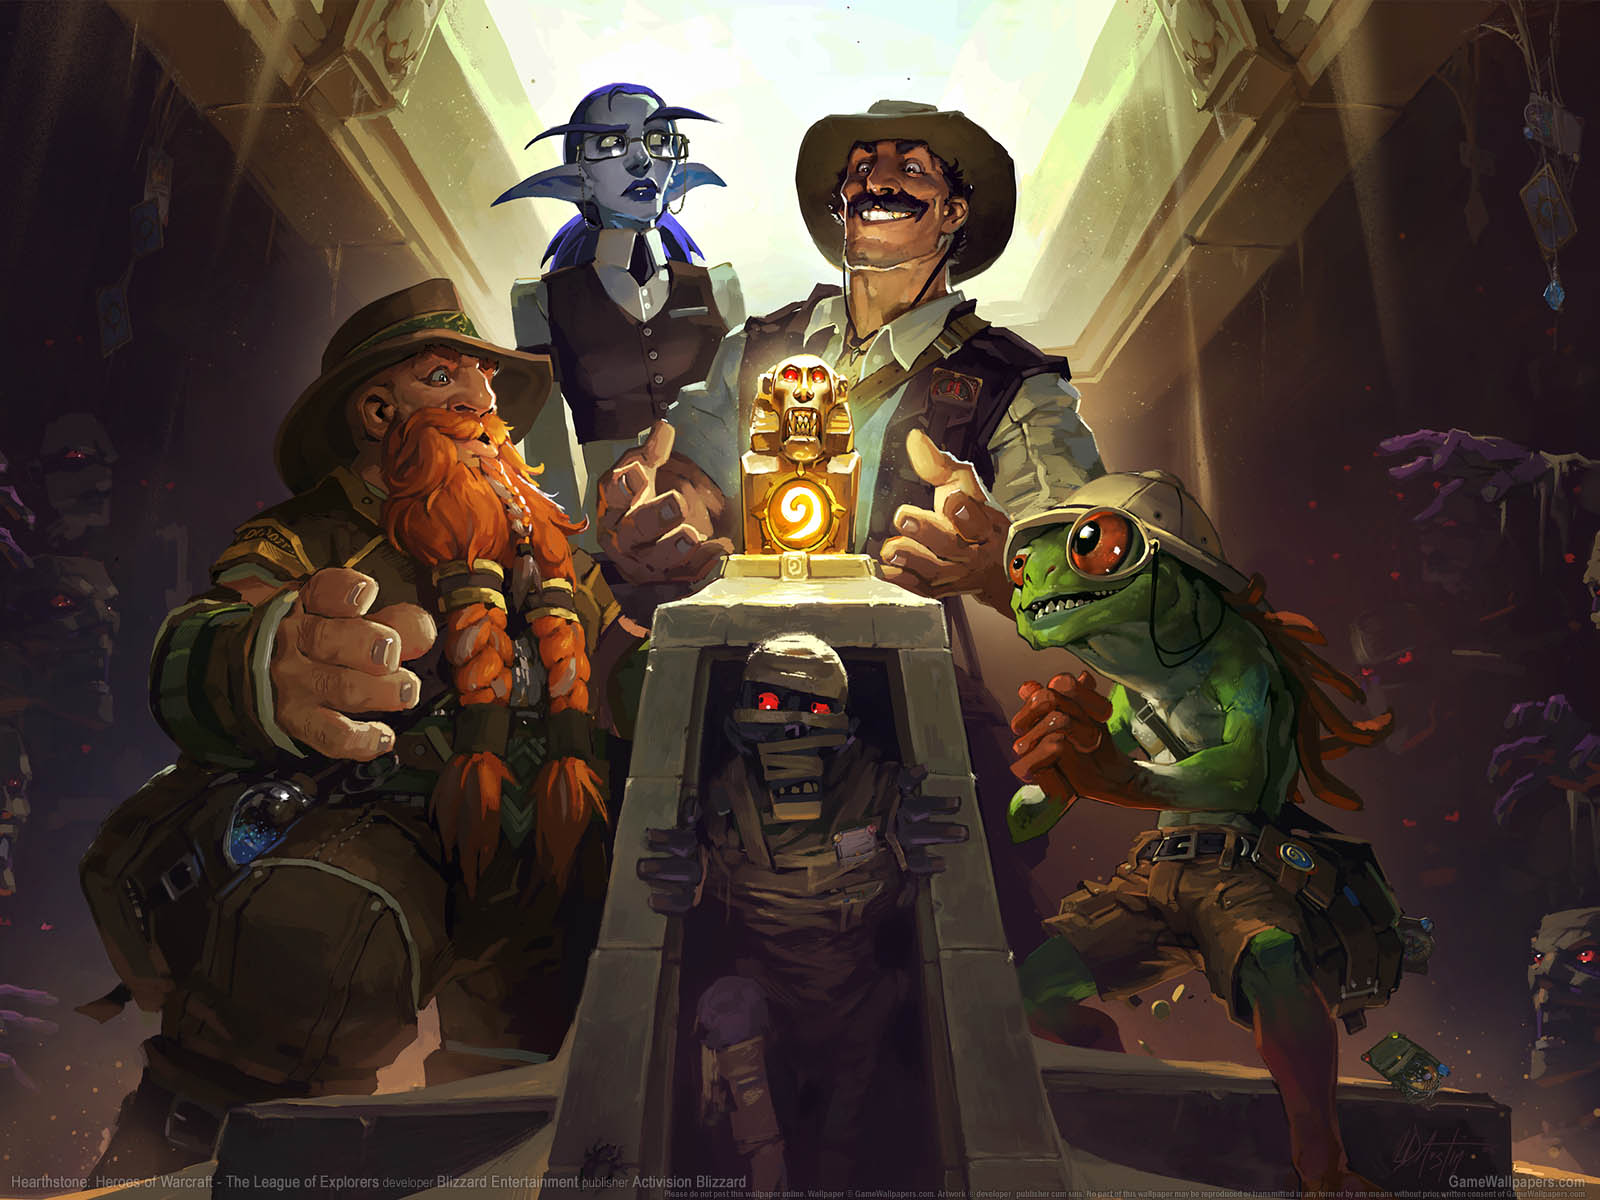 Hearthstone%253A Heroes of Warcraft - The League of Explorers wallpaper 01 1600x1200